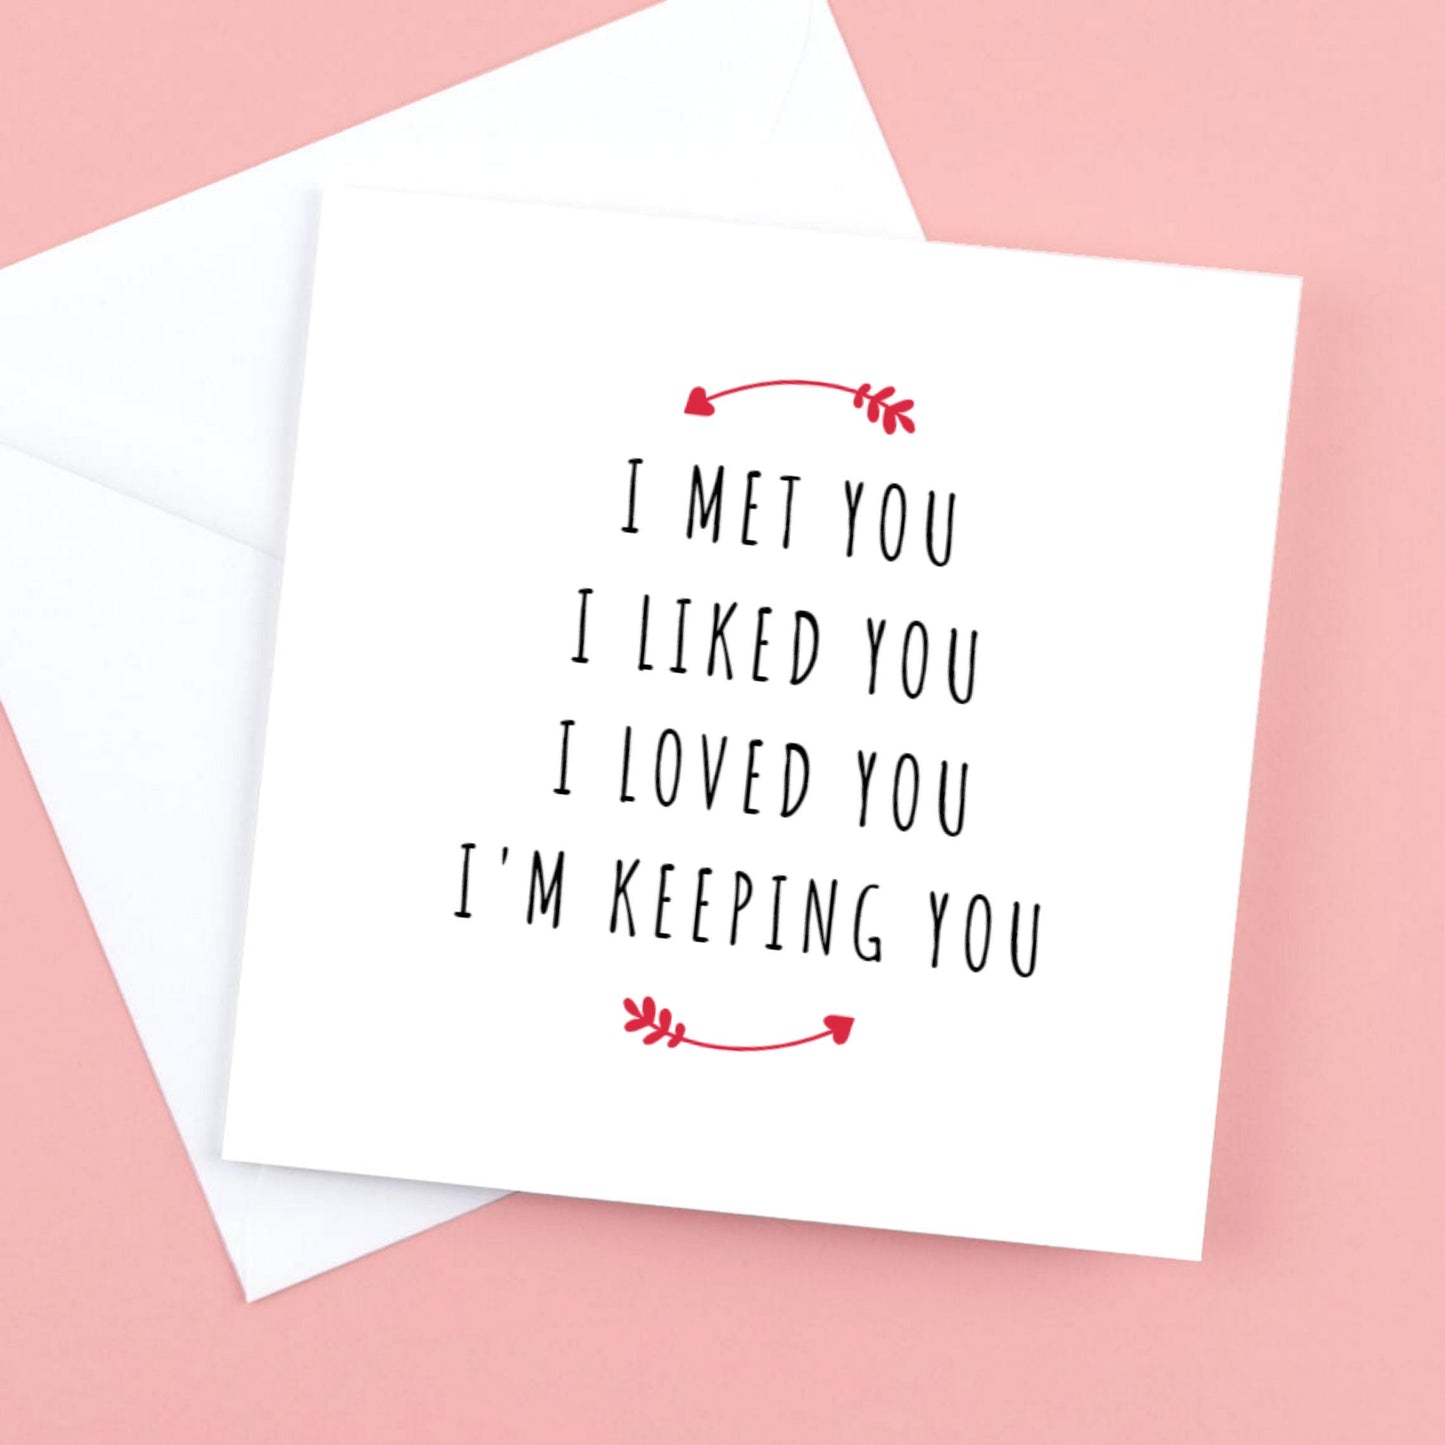 Valentines Card, I Met you, I Liked you, I Loved you, I'm keeping you .